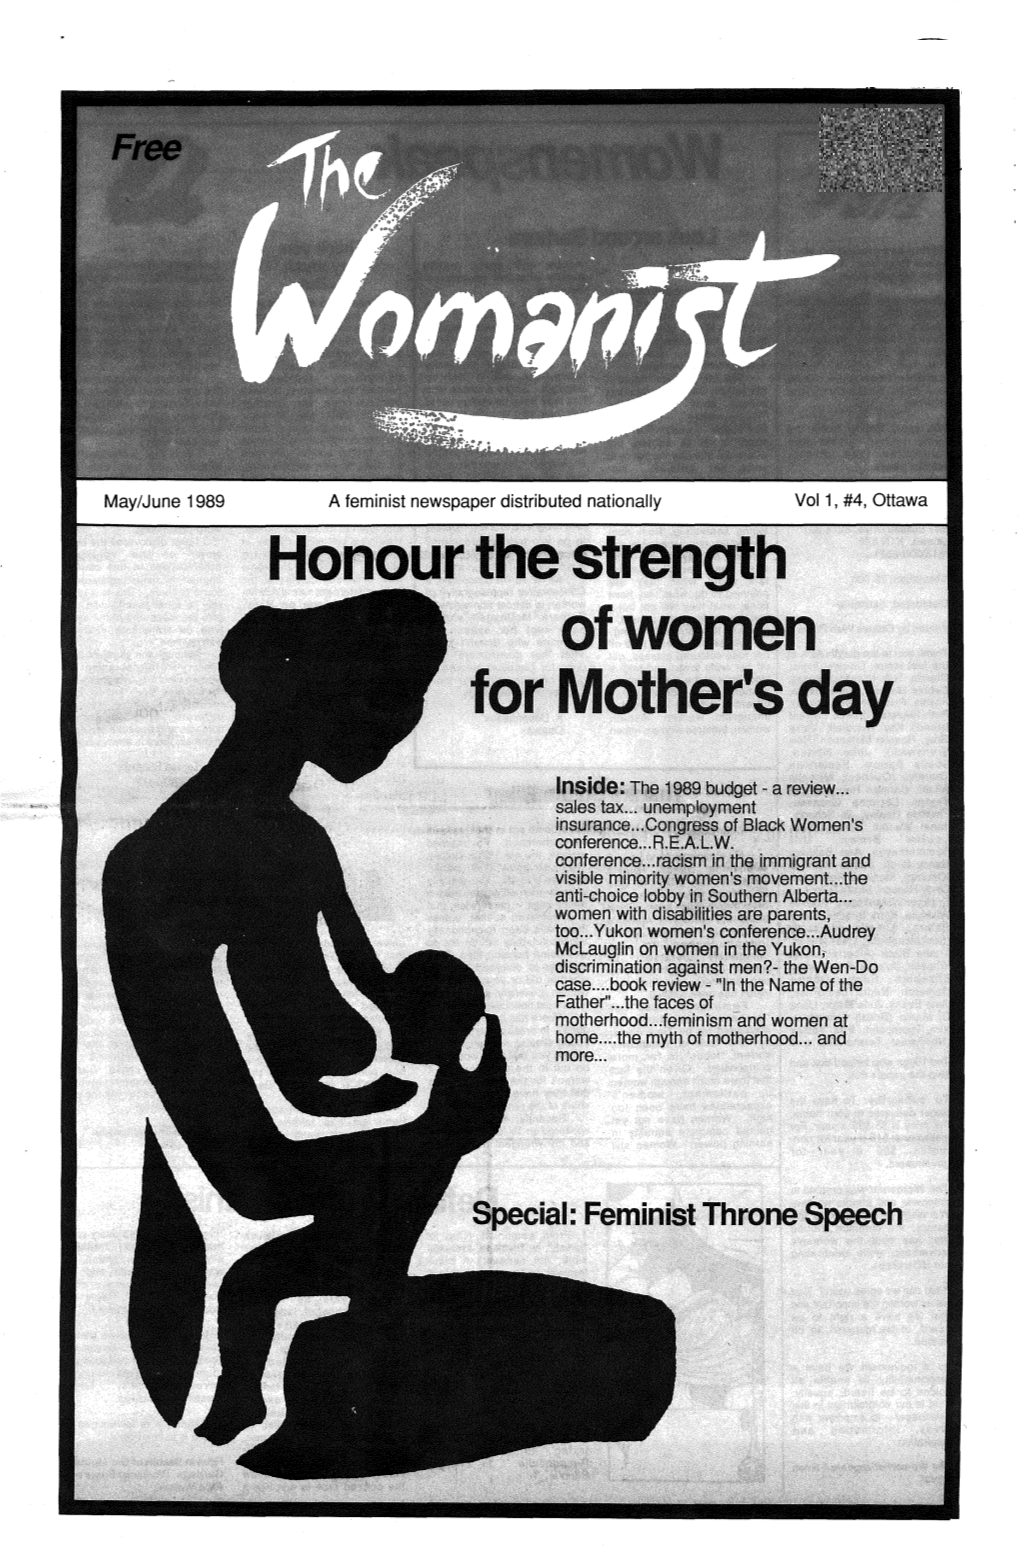 Of Women for Mother's Day